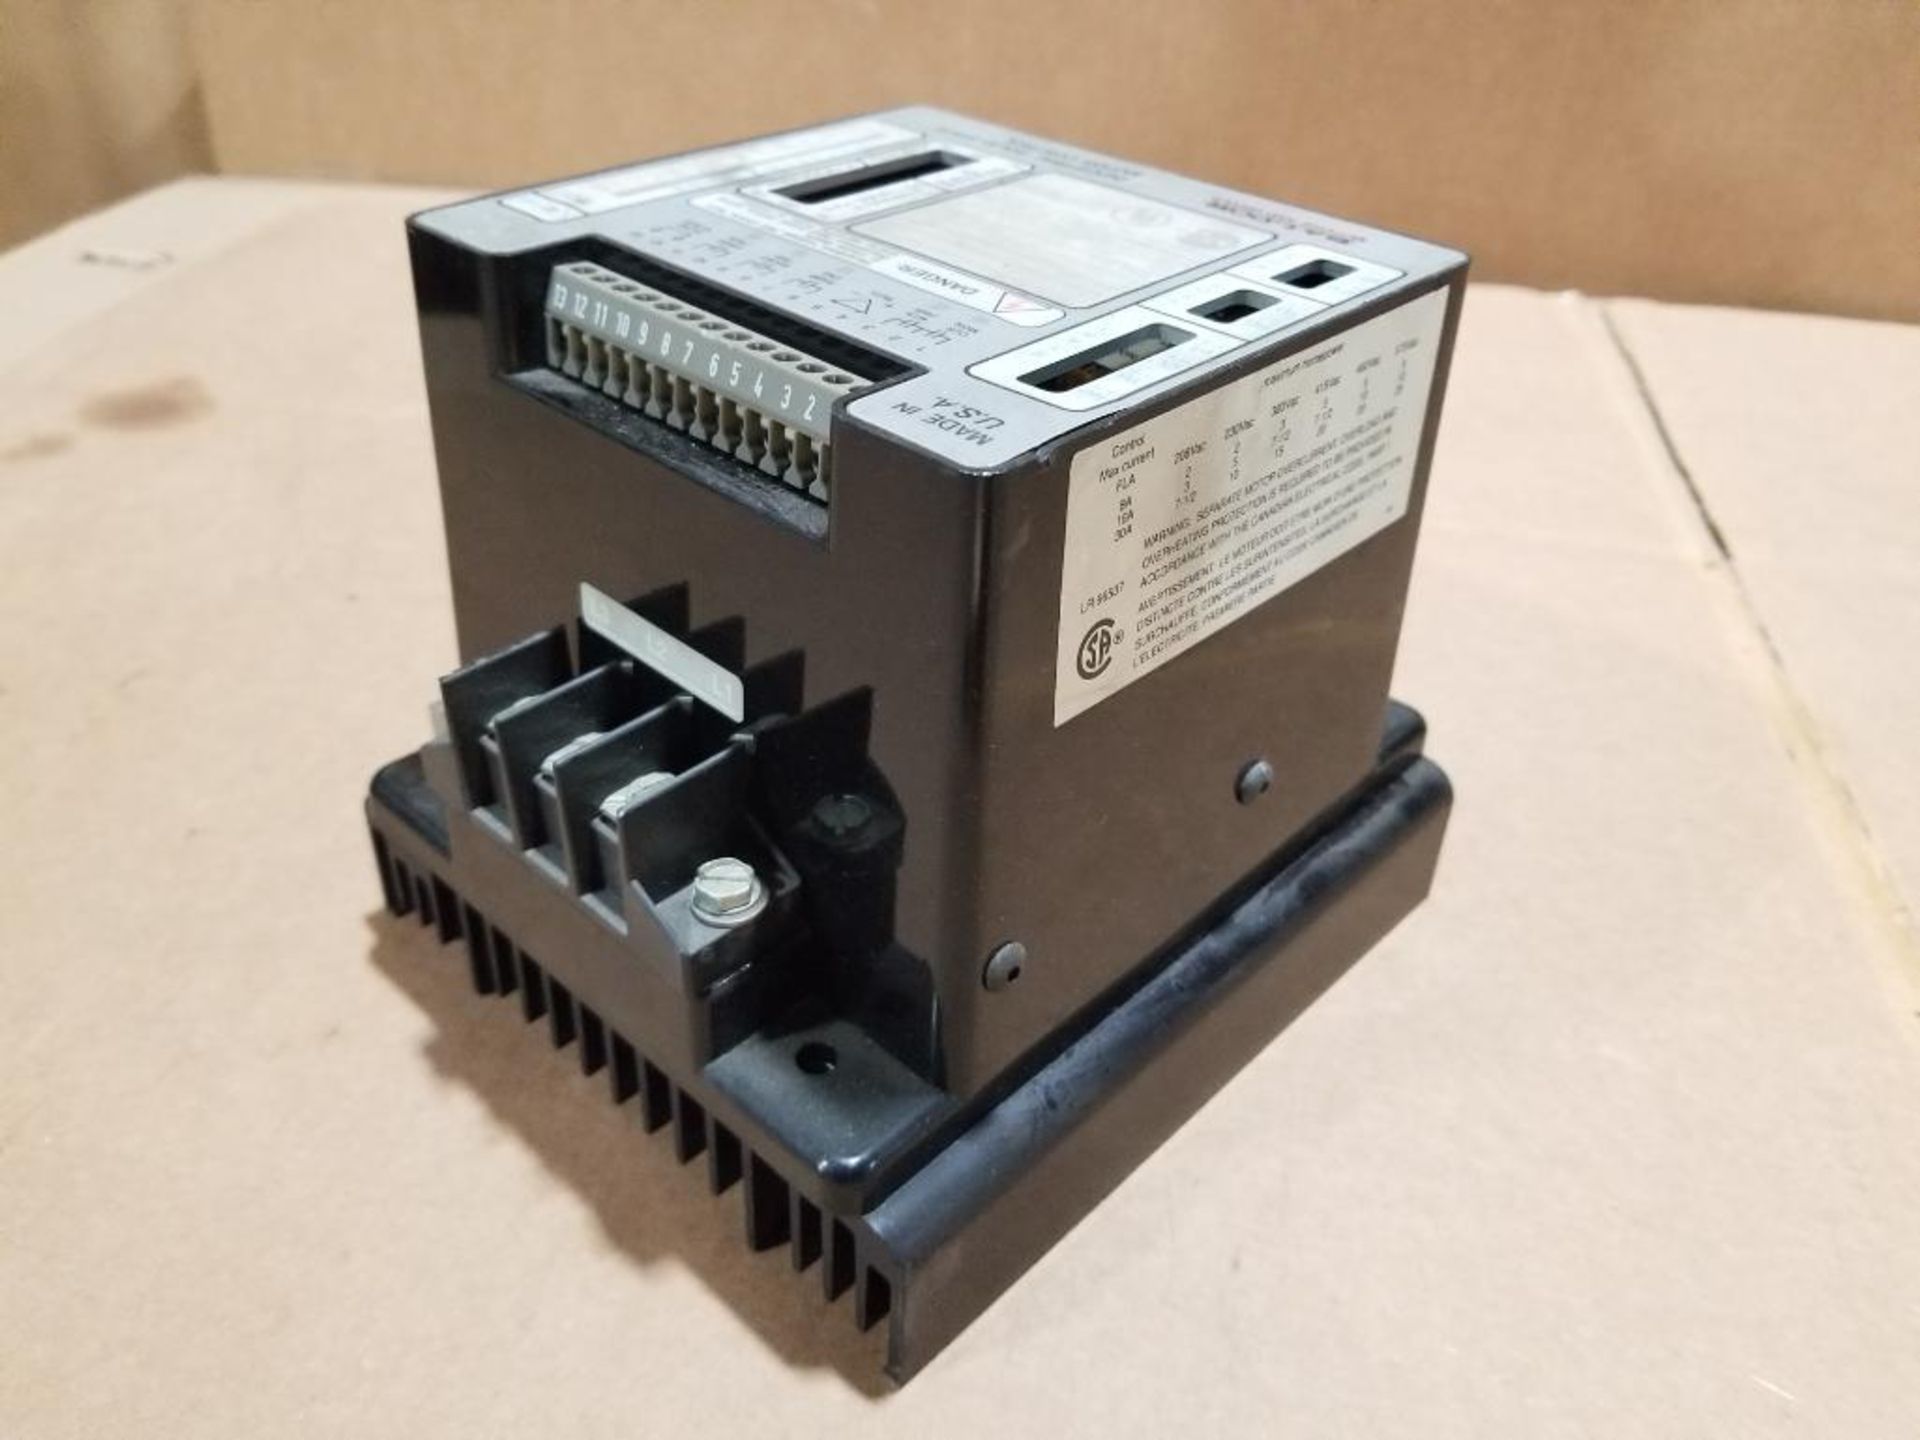 Baldor motors and drives. Industrial Solid State Motor Control. Catalog MA7008. - Image 4 of 6